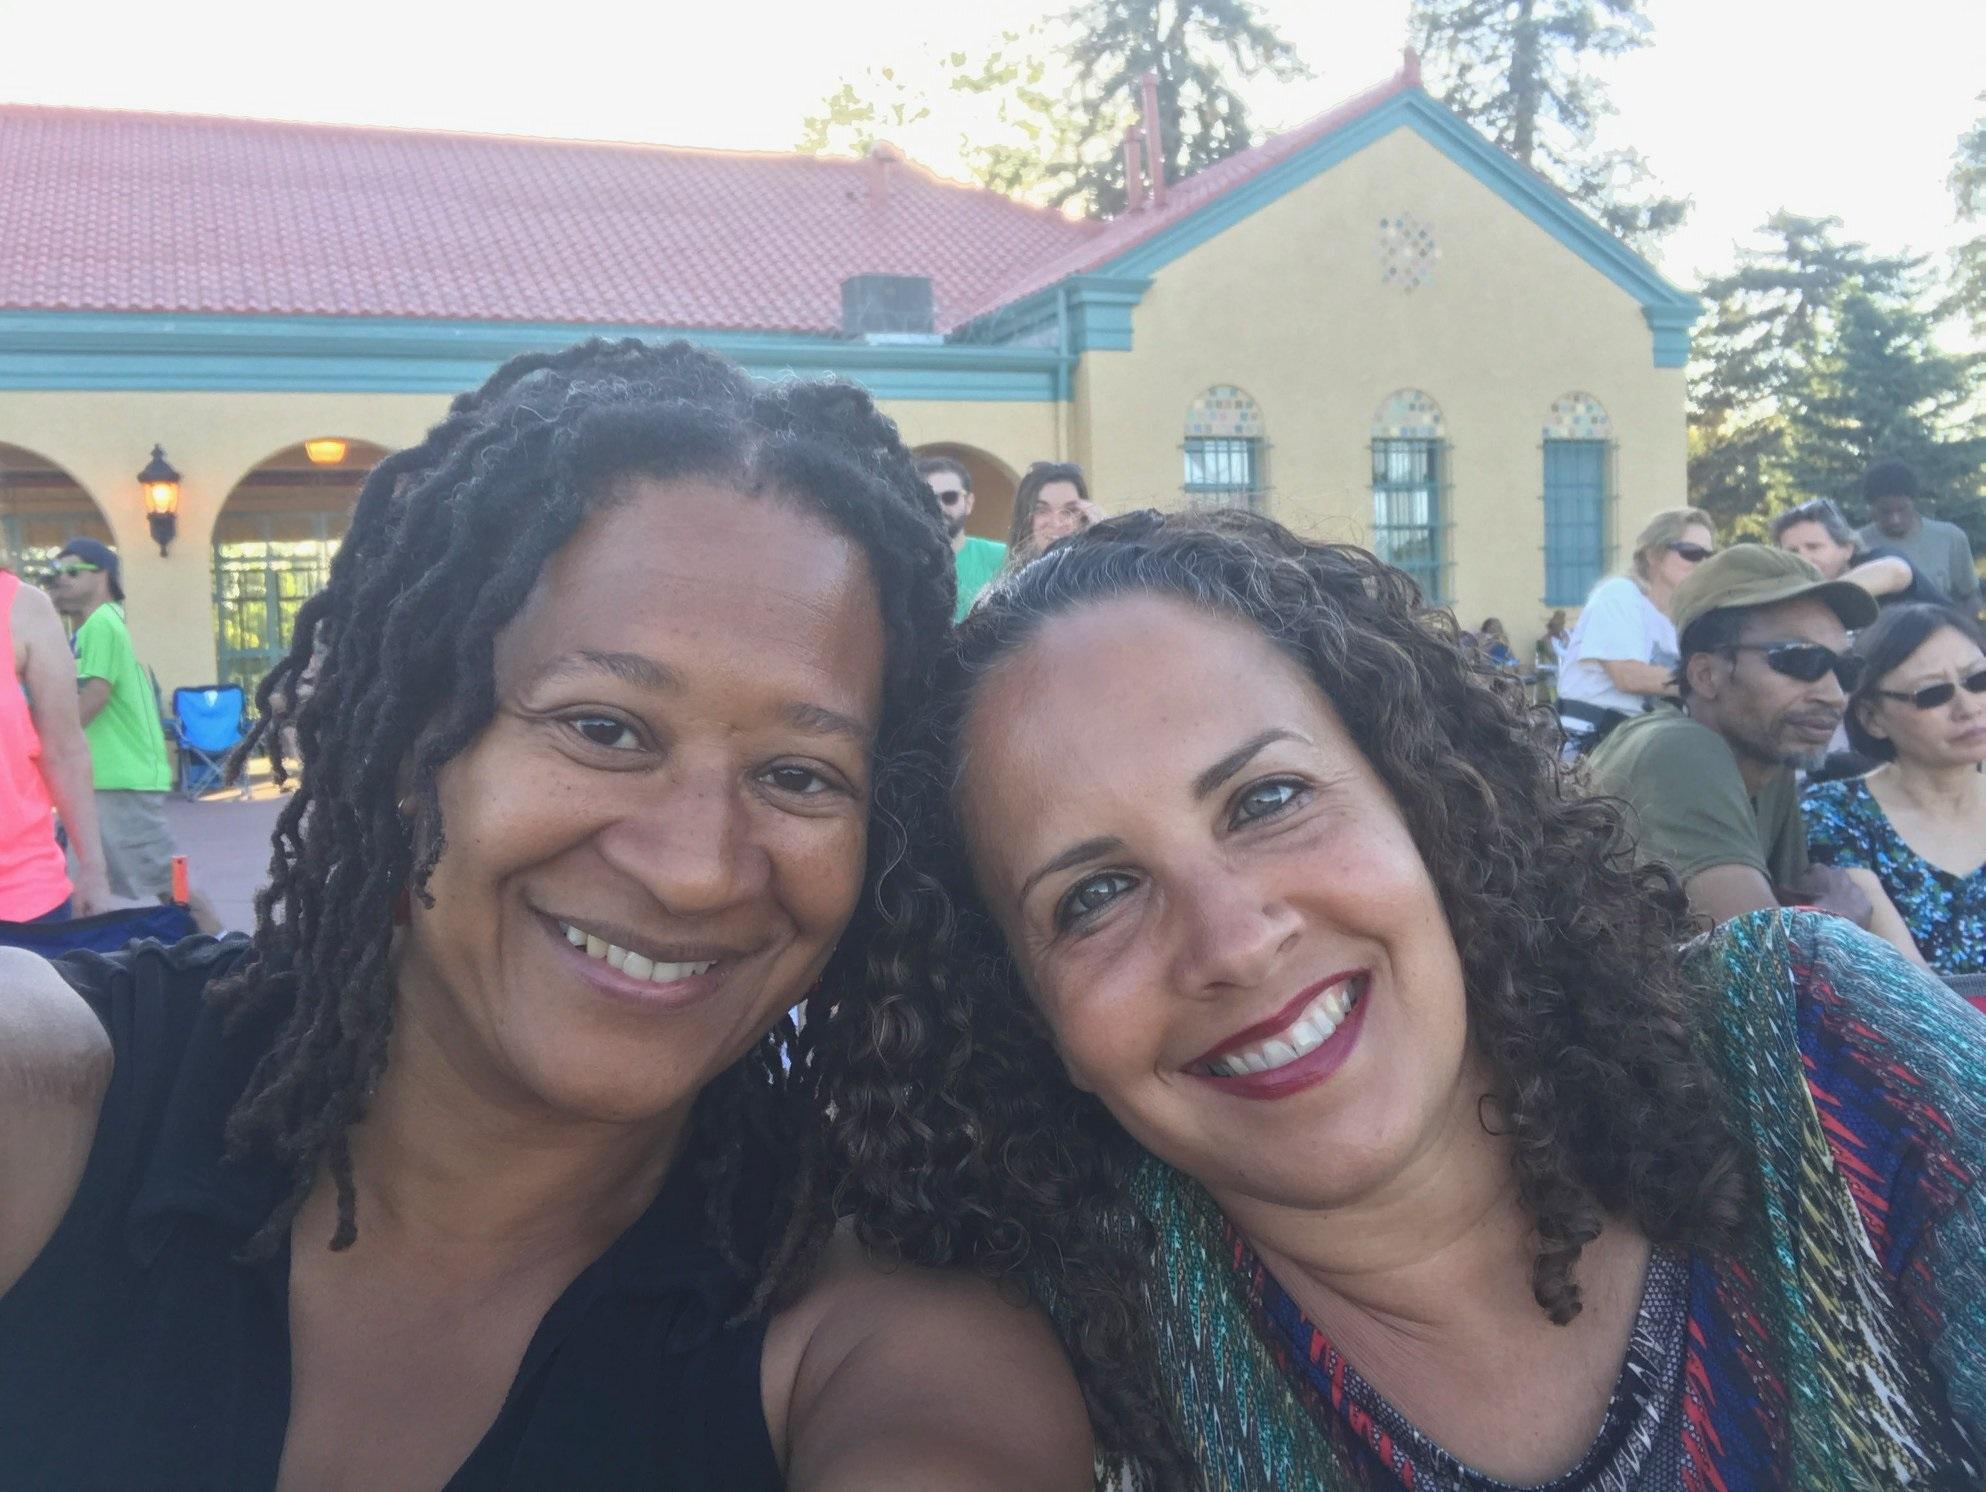 Professors Suzette Malveaux, a civil rights attorney who teaches at the University of Colorado Boulder's Byron White Center for the Study of American Constitutional Law, and Catherine Smith who teaches at the University of Denver Sturm College of Law.